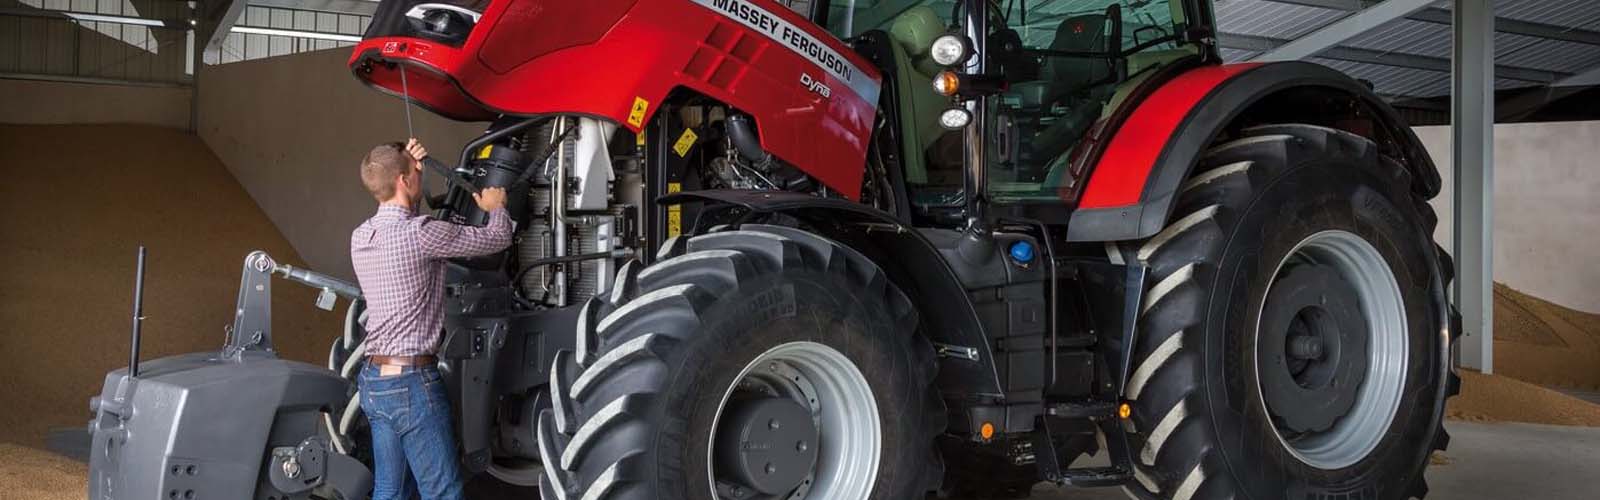 Maintaining Your Tractor for Optimal Performance in Guyanas Climate and Terrain